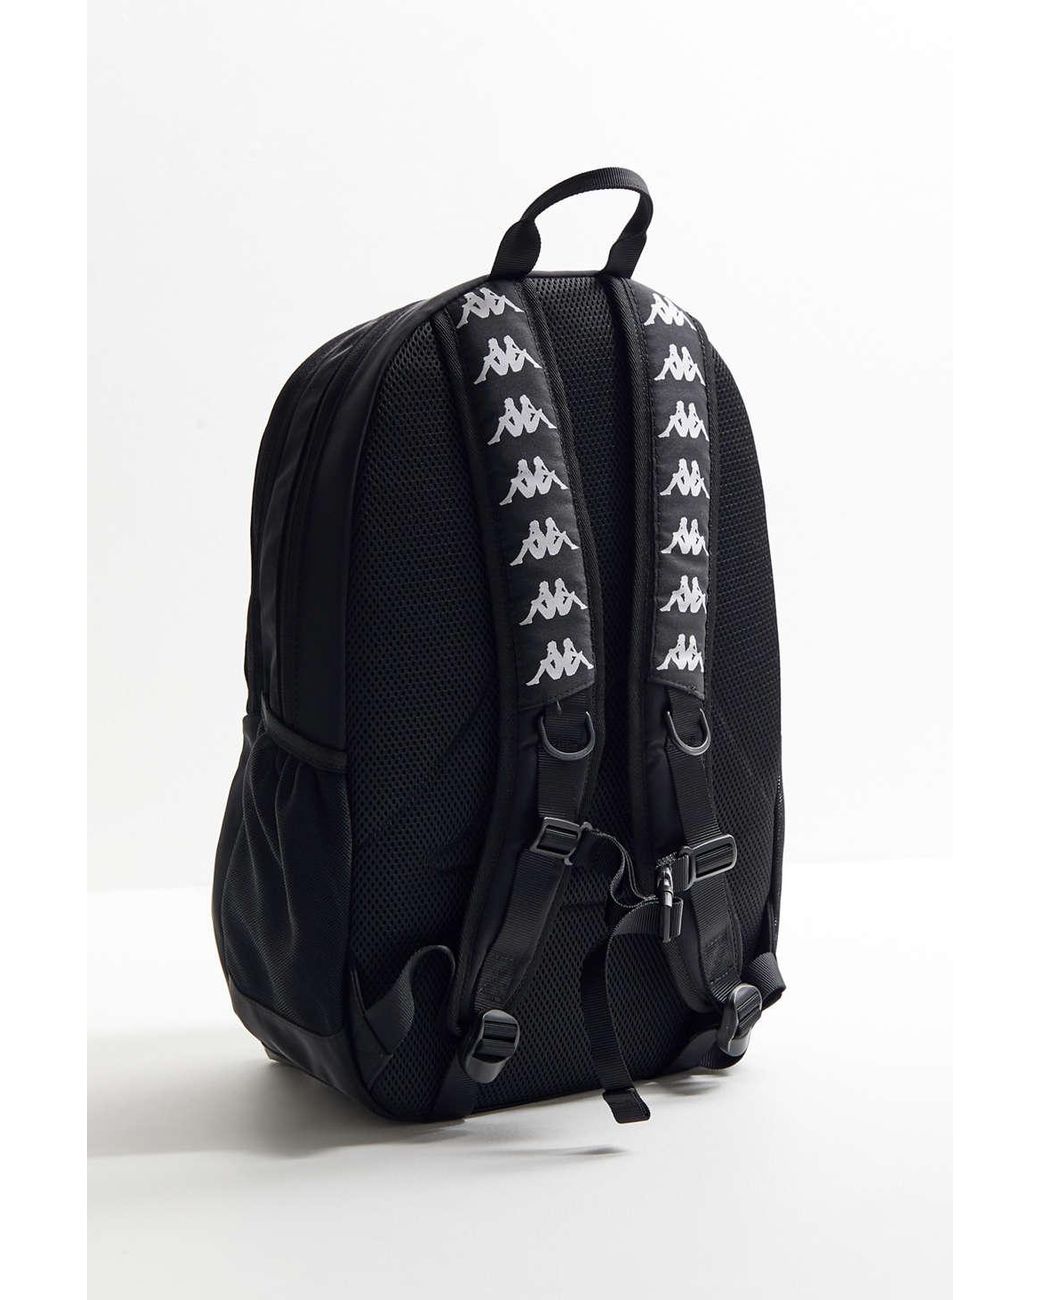 Kappa Synthetic The Premium Backpack In Black And White | Lyst